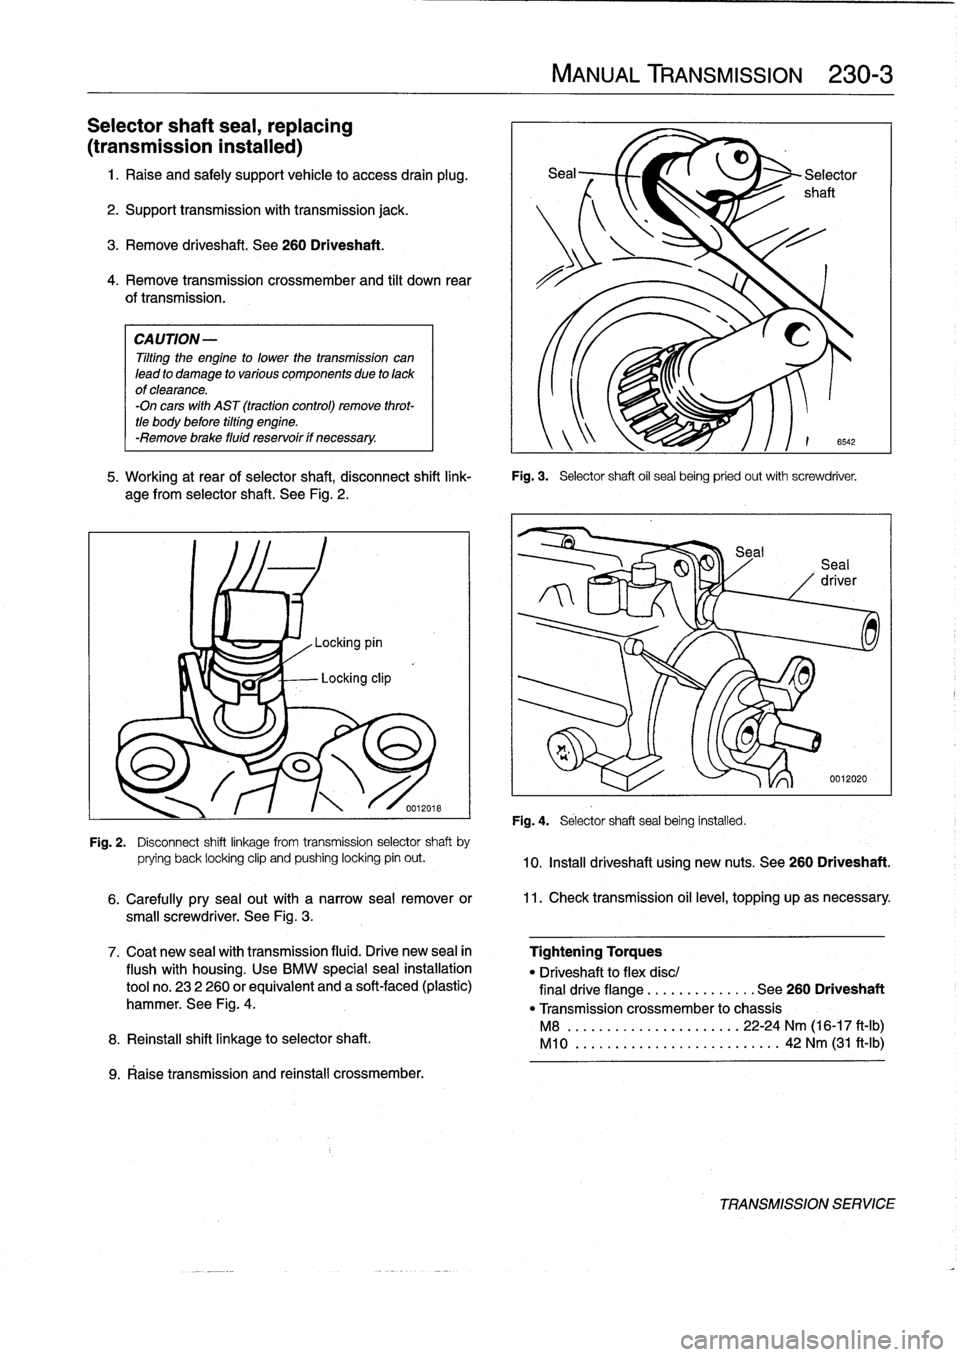 BMW 328i 1994 E36 User Guide 
Selector
shaft
seal,
replacing

(transmission
instalied)

1
.
Raise
and
safely
support
vehicle
to
access
drain
plug
.

2
.
Support
transmission
with
transmission
jack
.

3
.
Remove
driveshaft
.
See
2